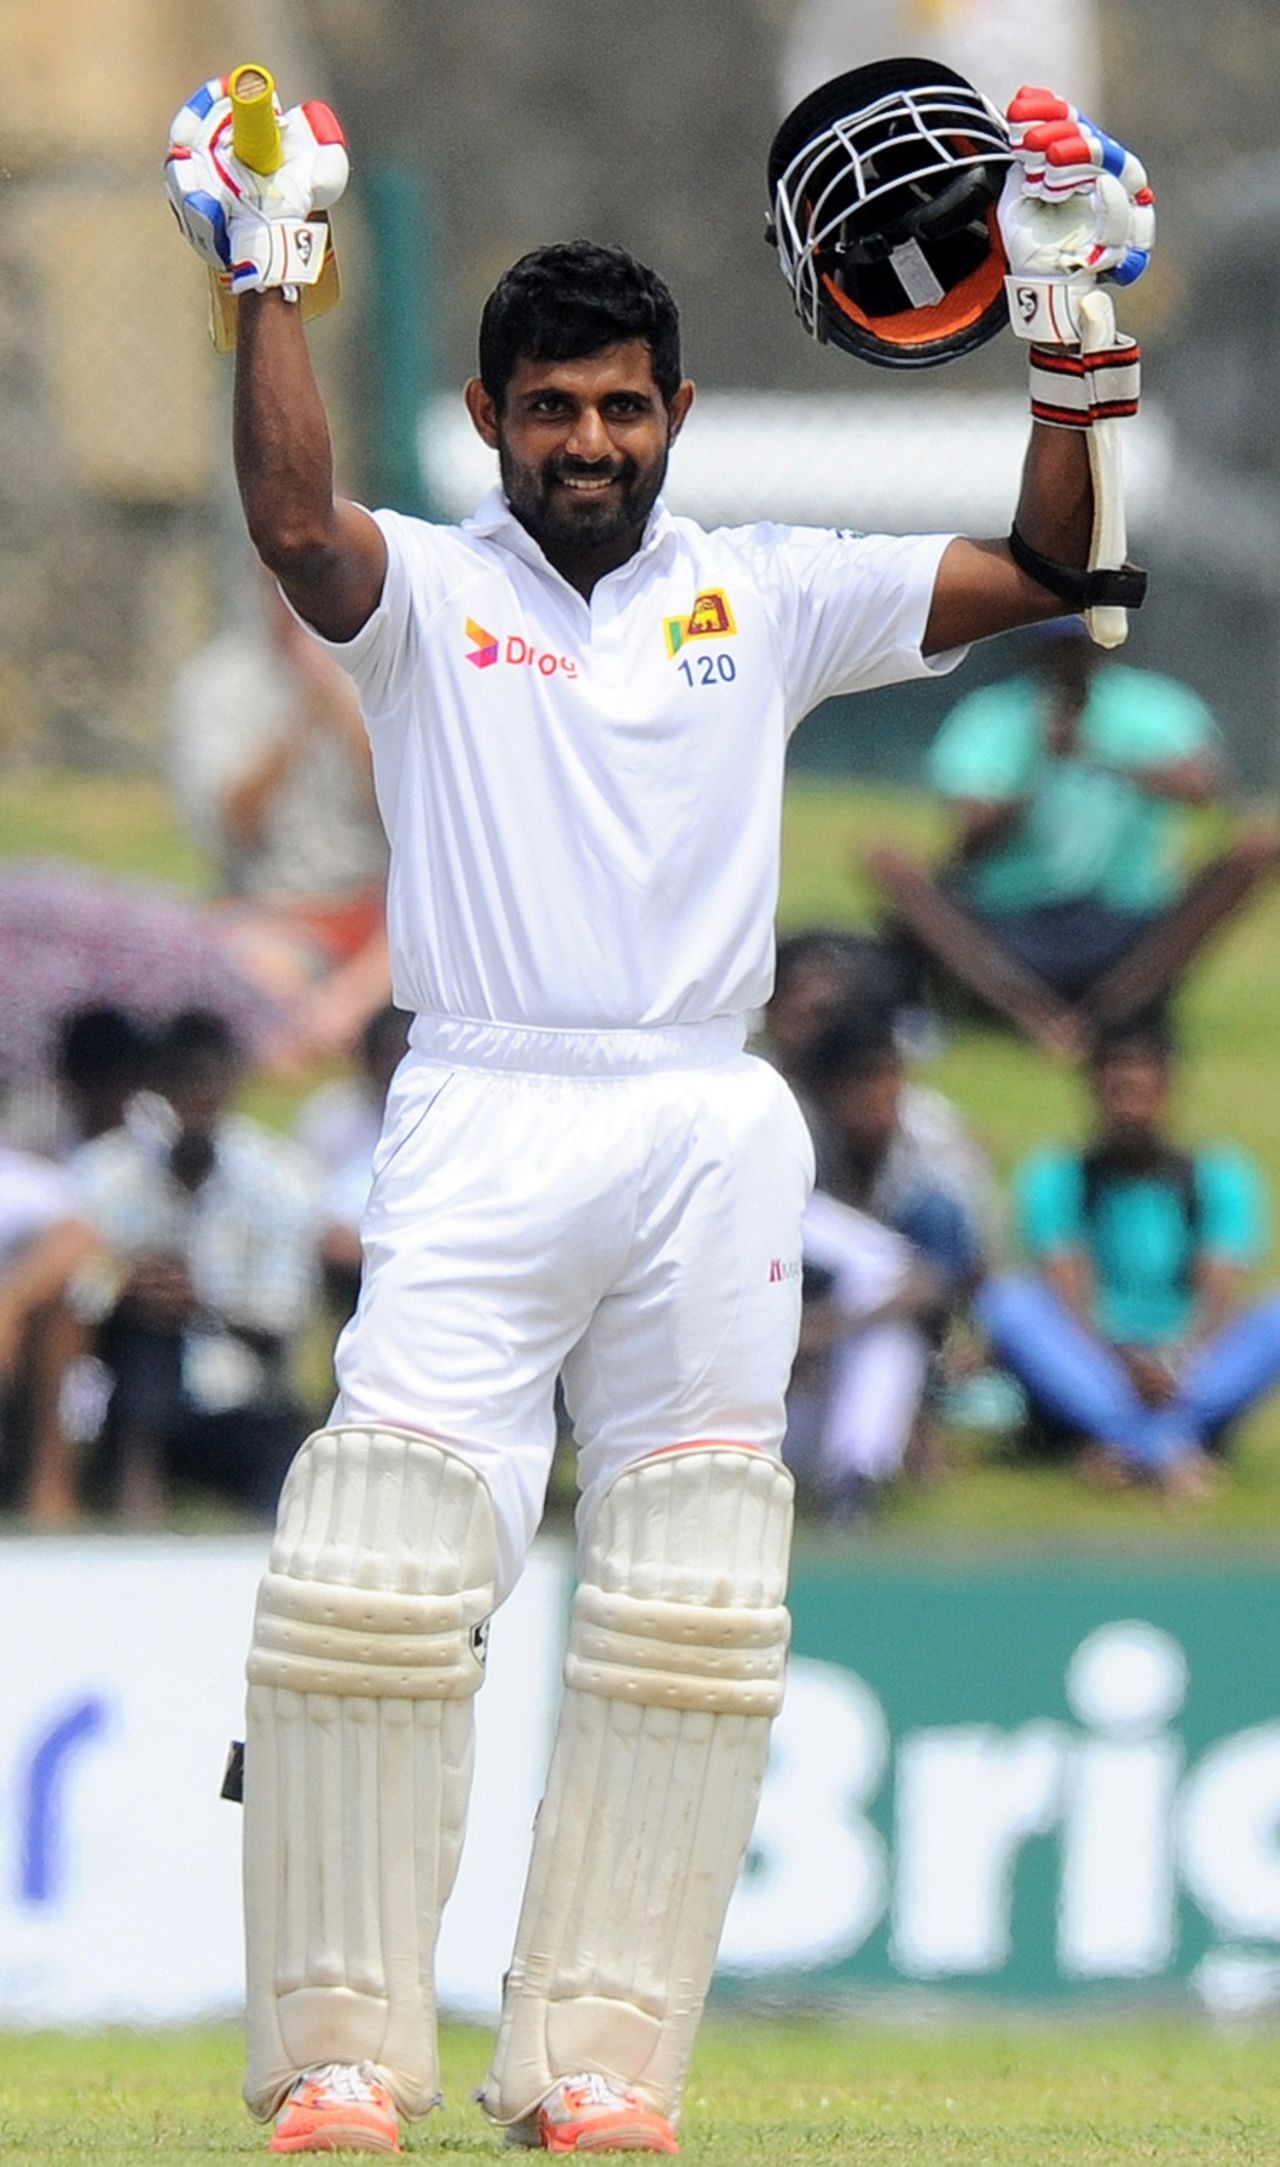 Kaushal Silva is delighted after bringing up his second Test century, Sri Lanka v Pakistan, 1st Test, Galle, 3rd day, June 19, 2015 